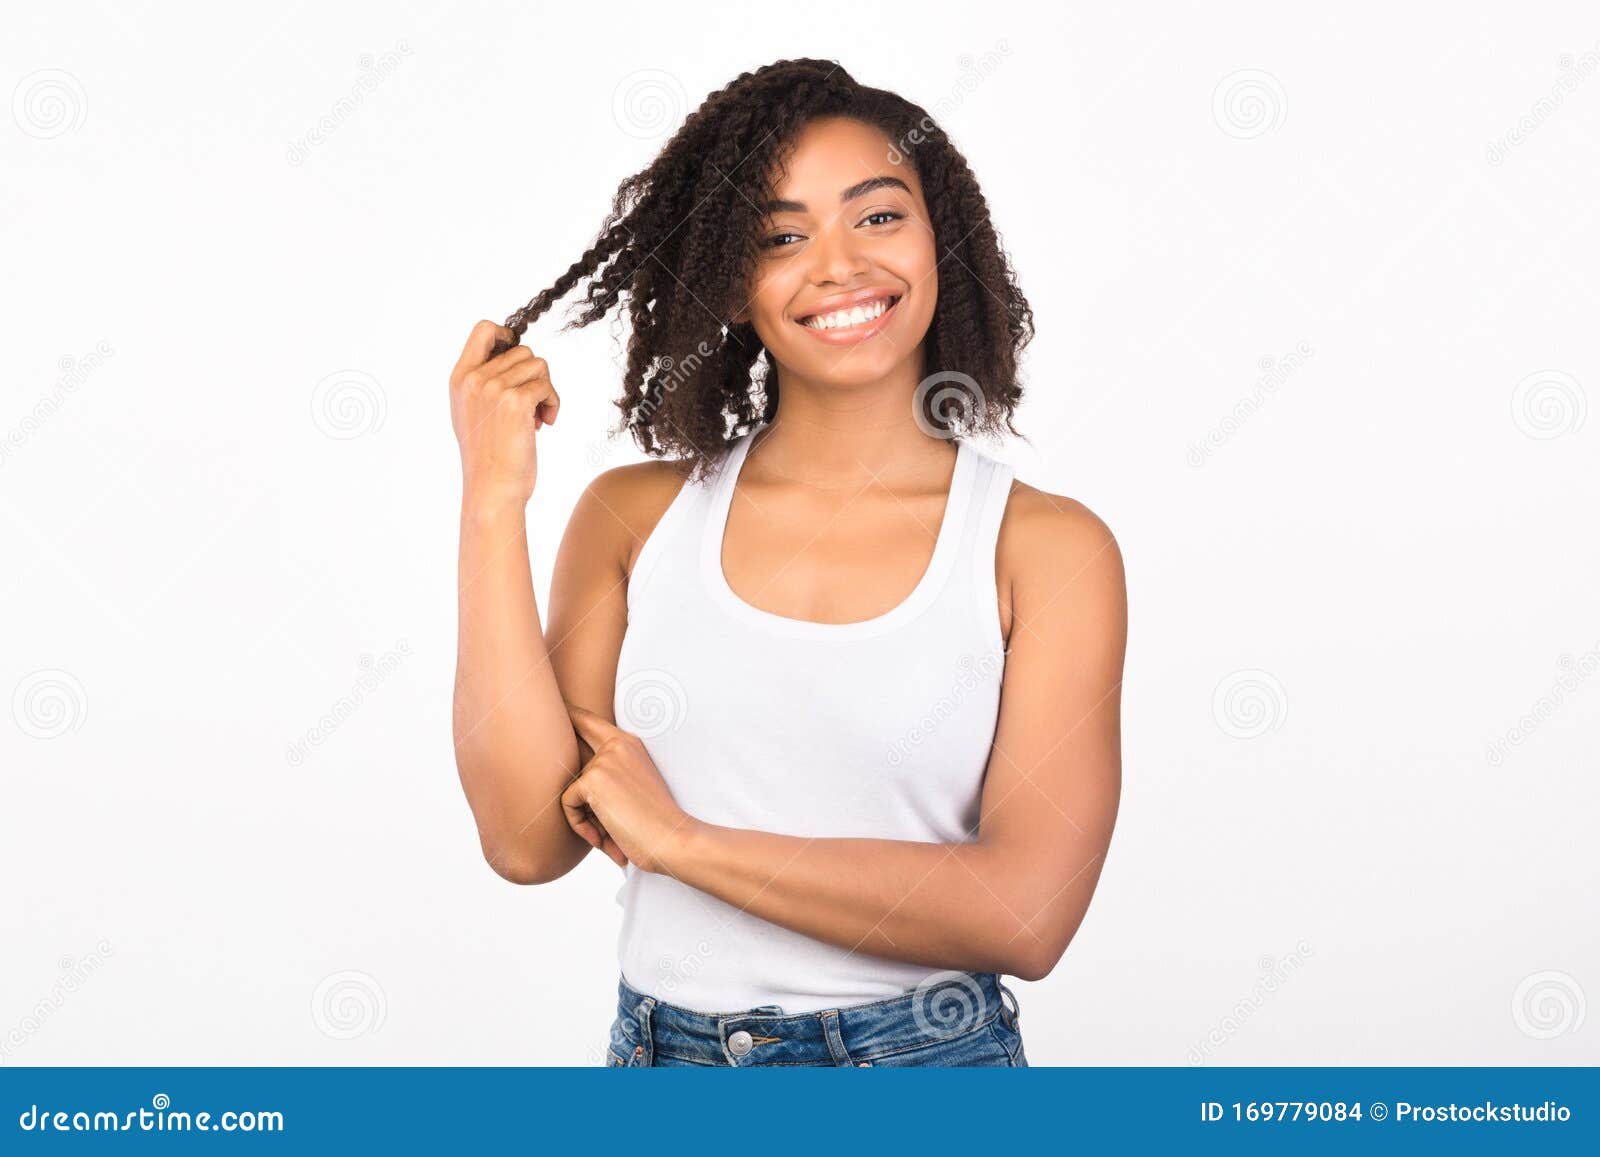 Woman playing with hair